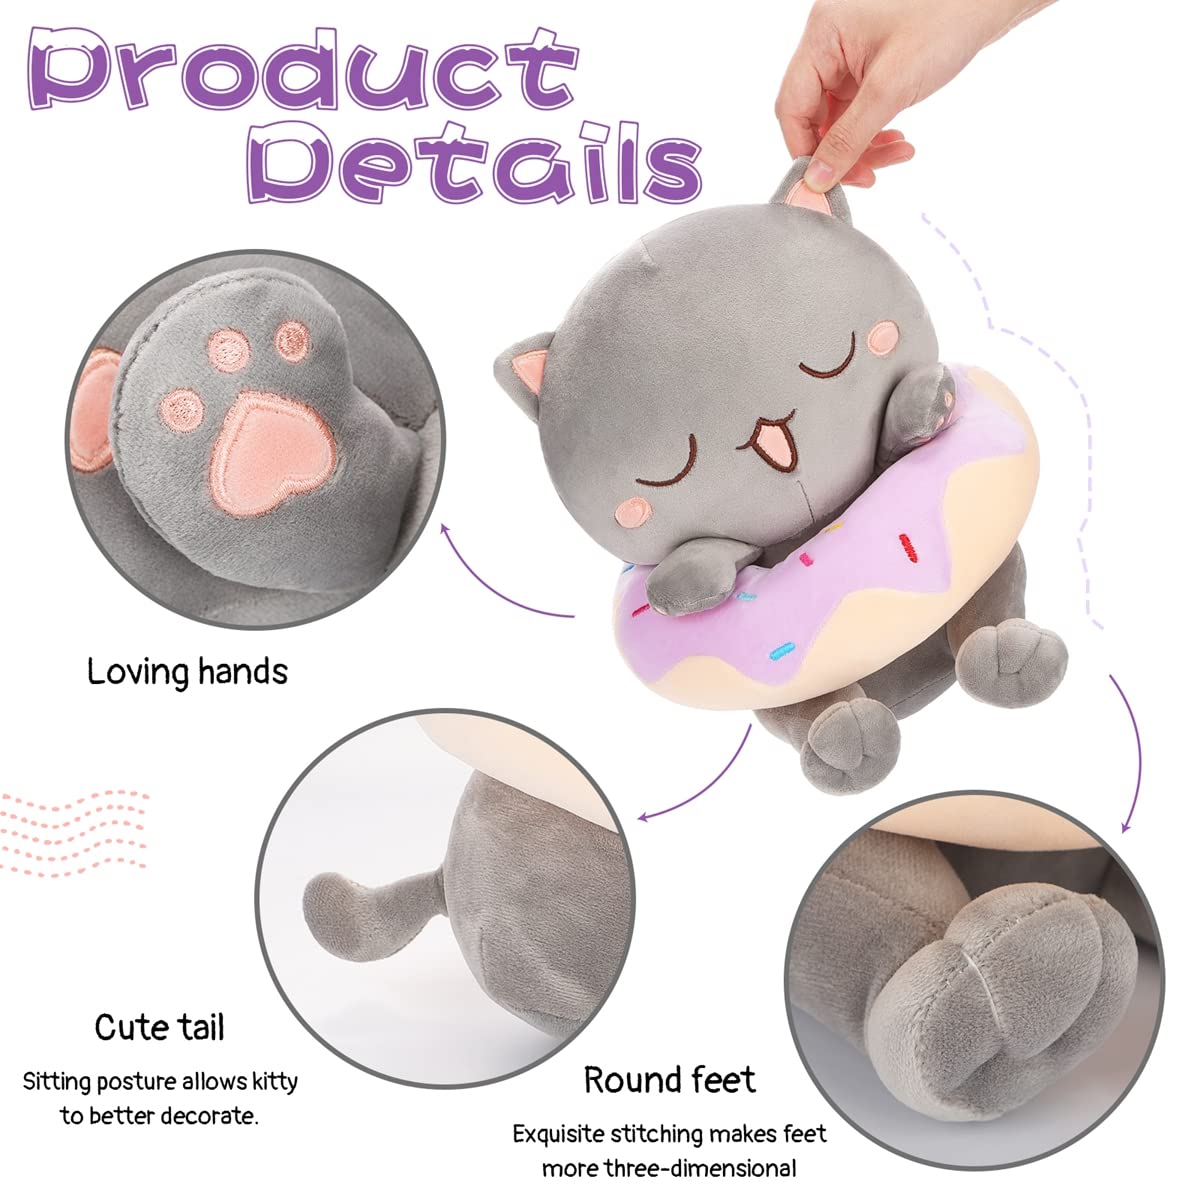 25 CM / 10 inch Cute cat plush, stuffed soft animal with donut, super soft cute gray kitten plush toy with closed eyes